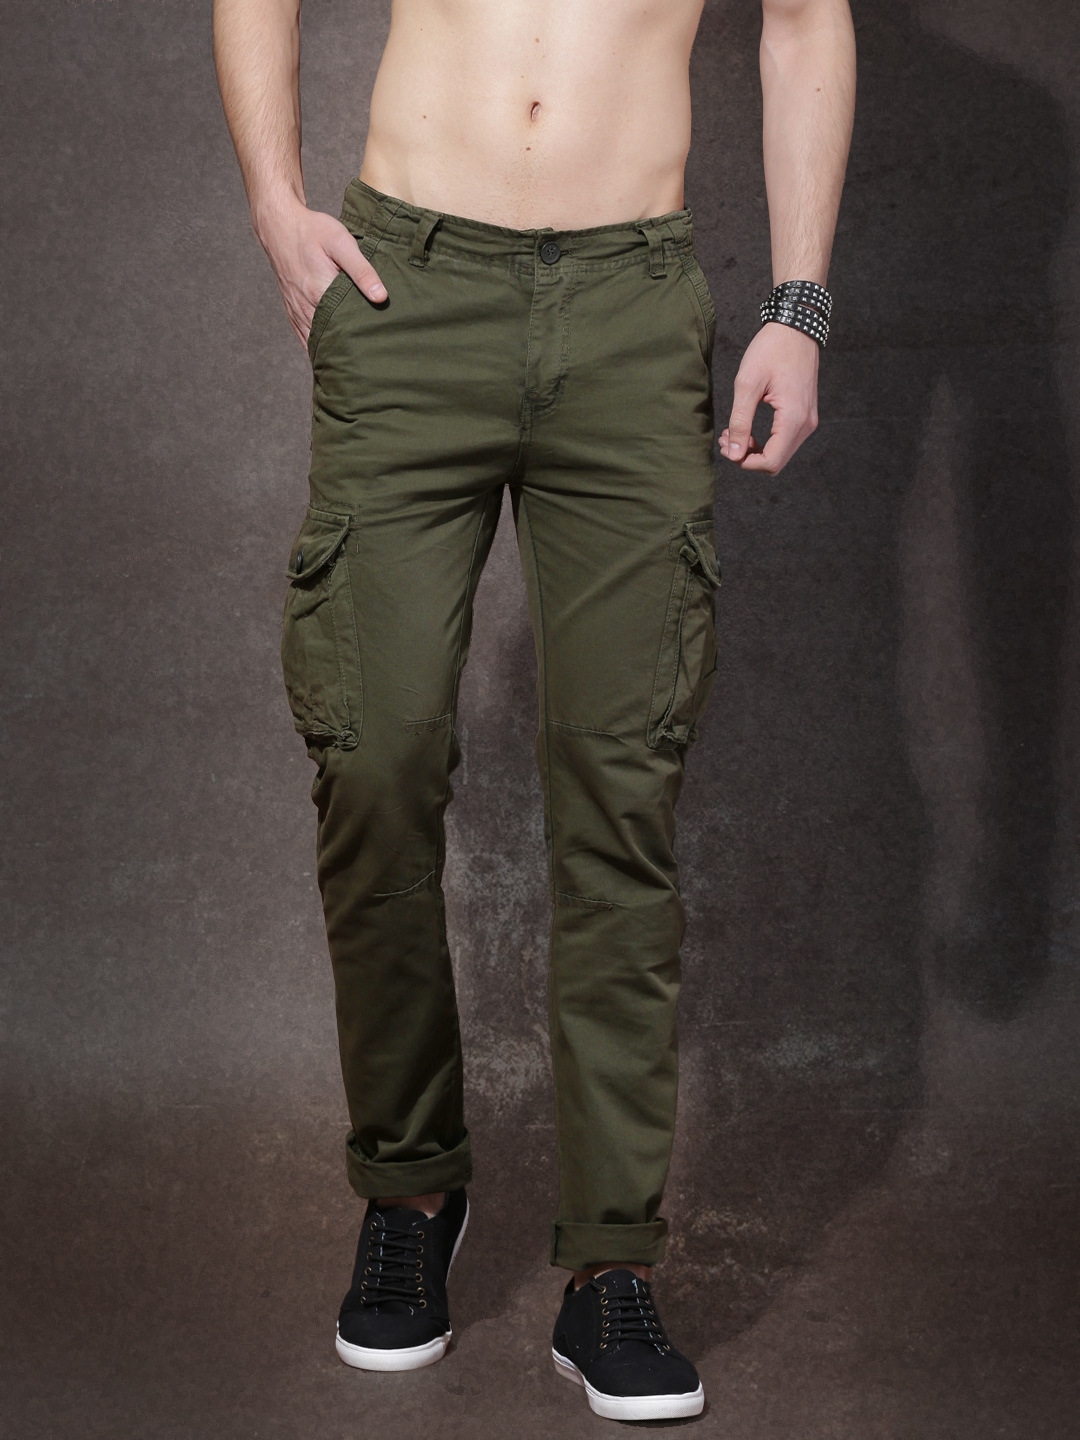 Military Green Trousers  Buy Military Green Trousers online in India